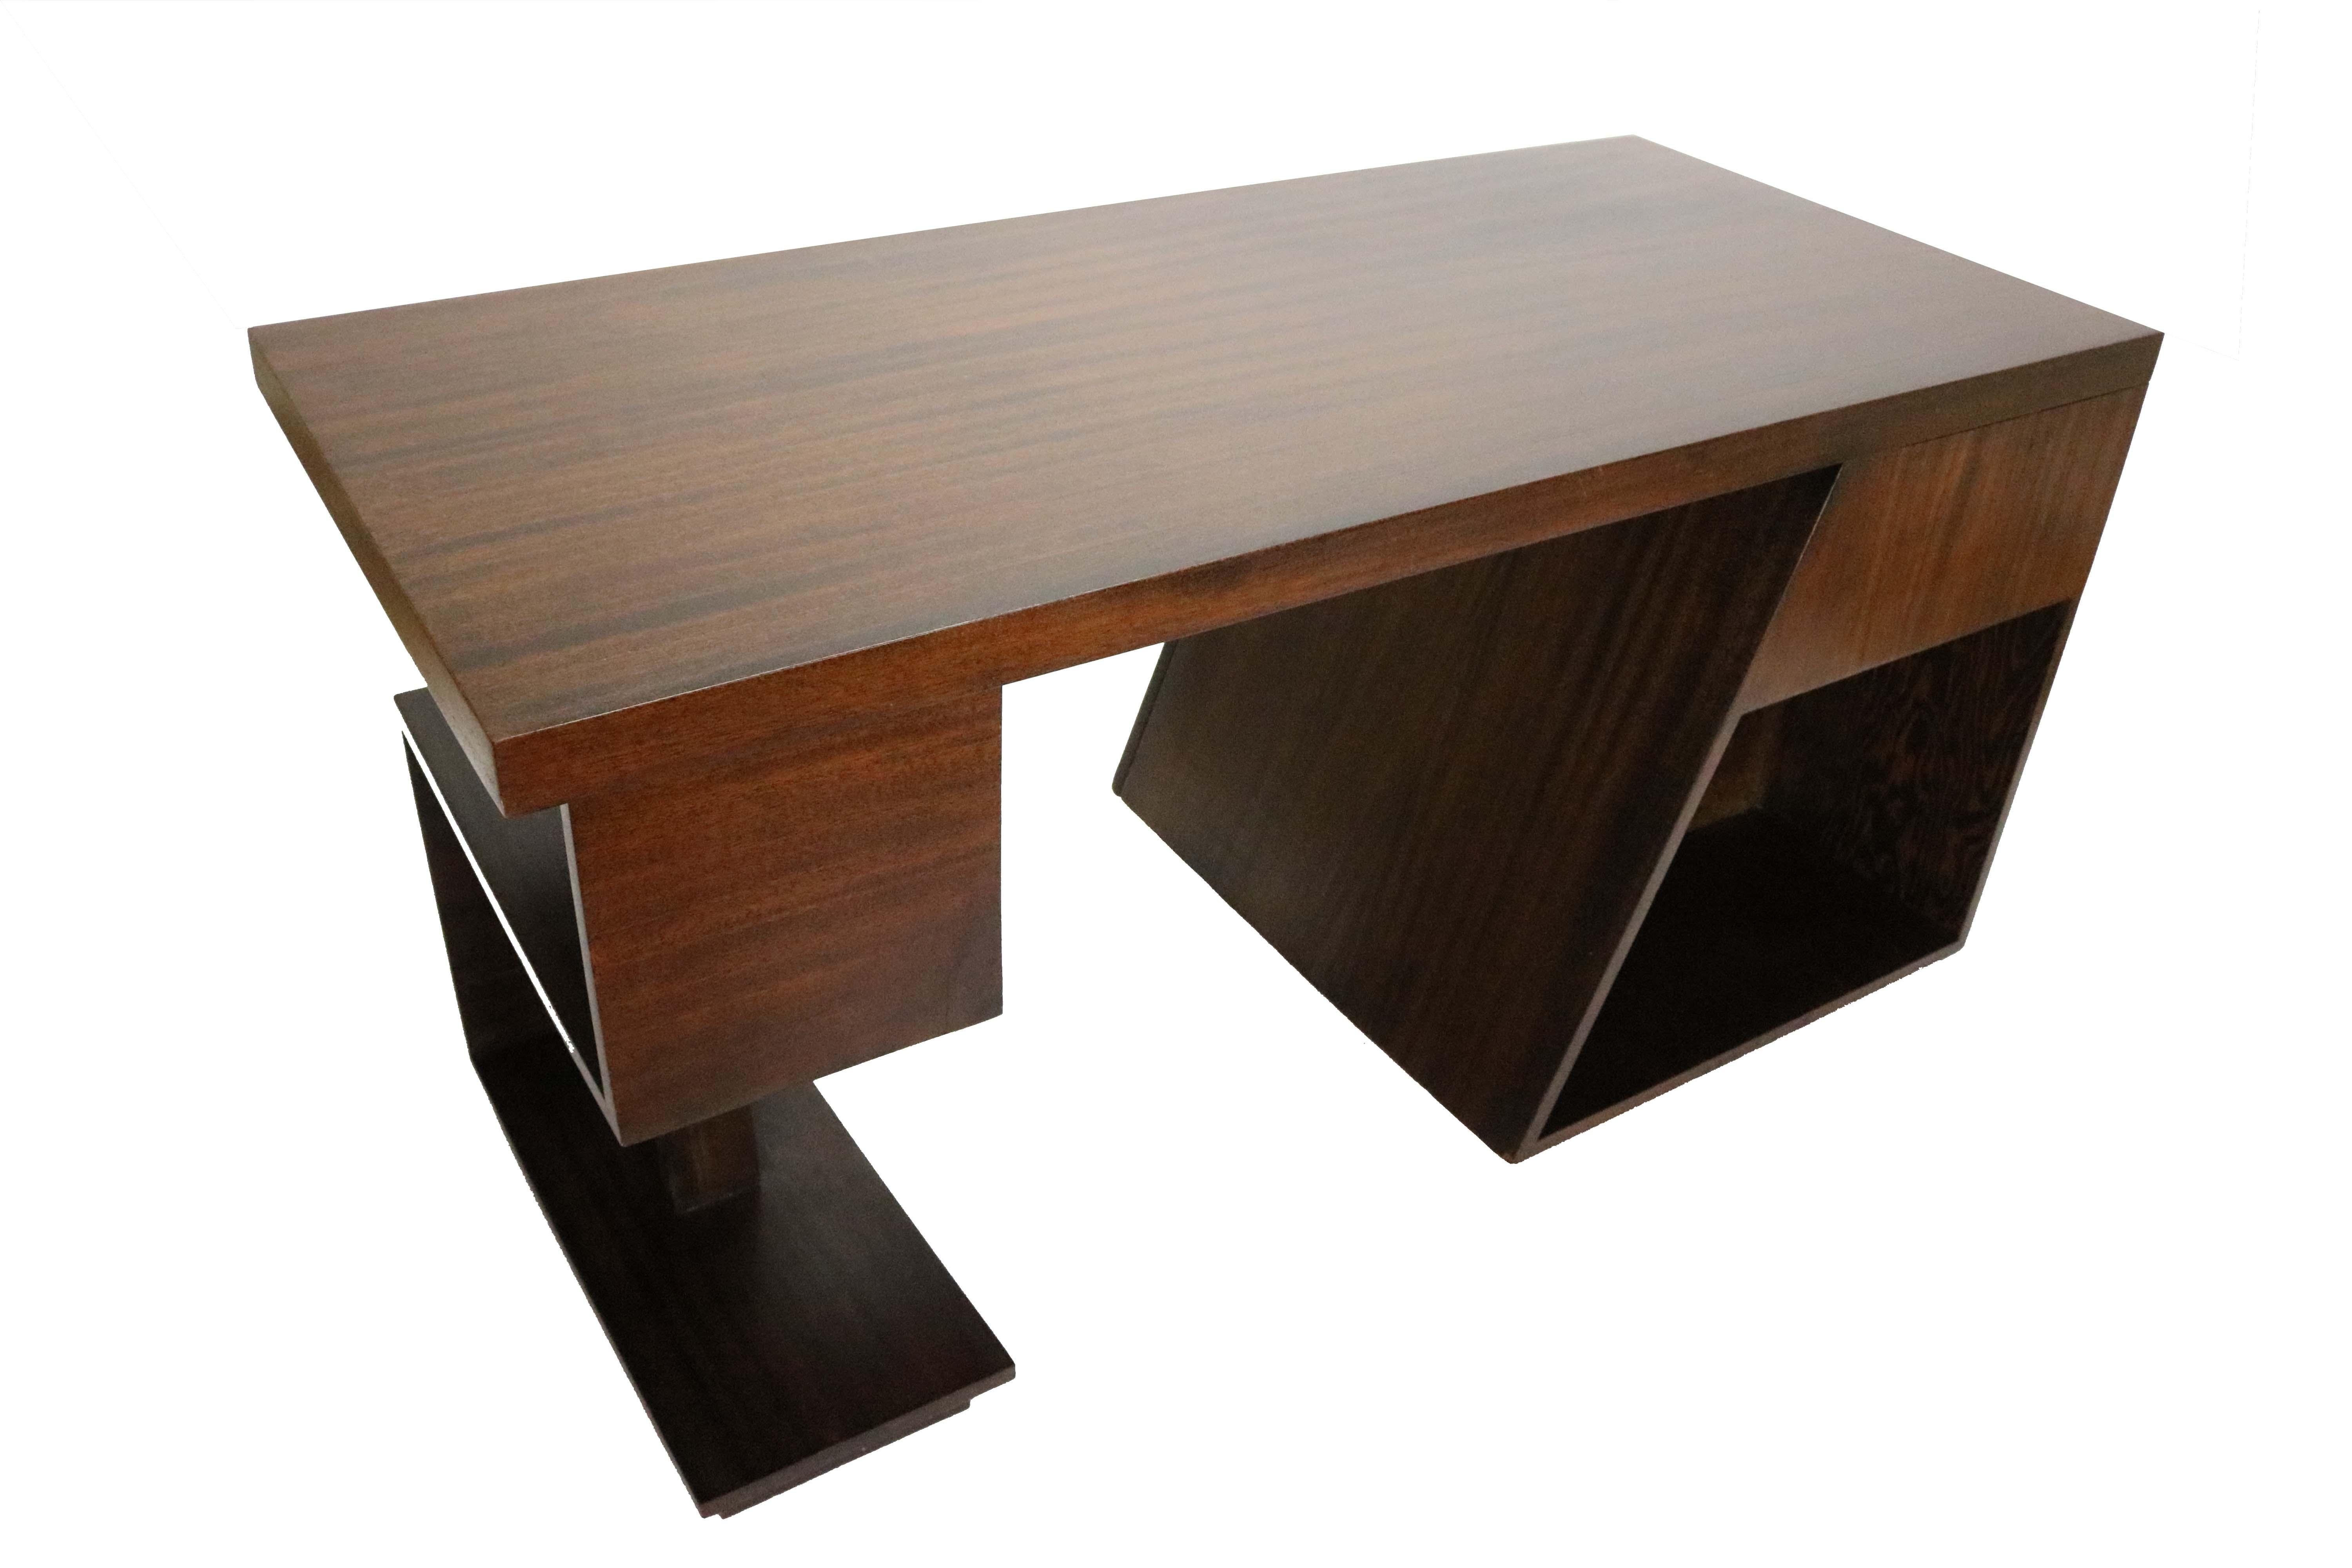 Mid-20th Century Modernist Partners Desk by Maximillian for Karp Furniture Paul Frankl Style